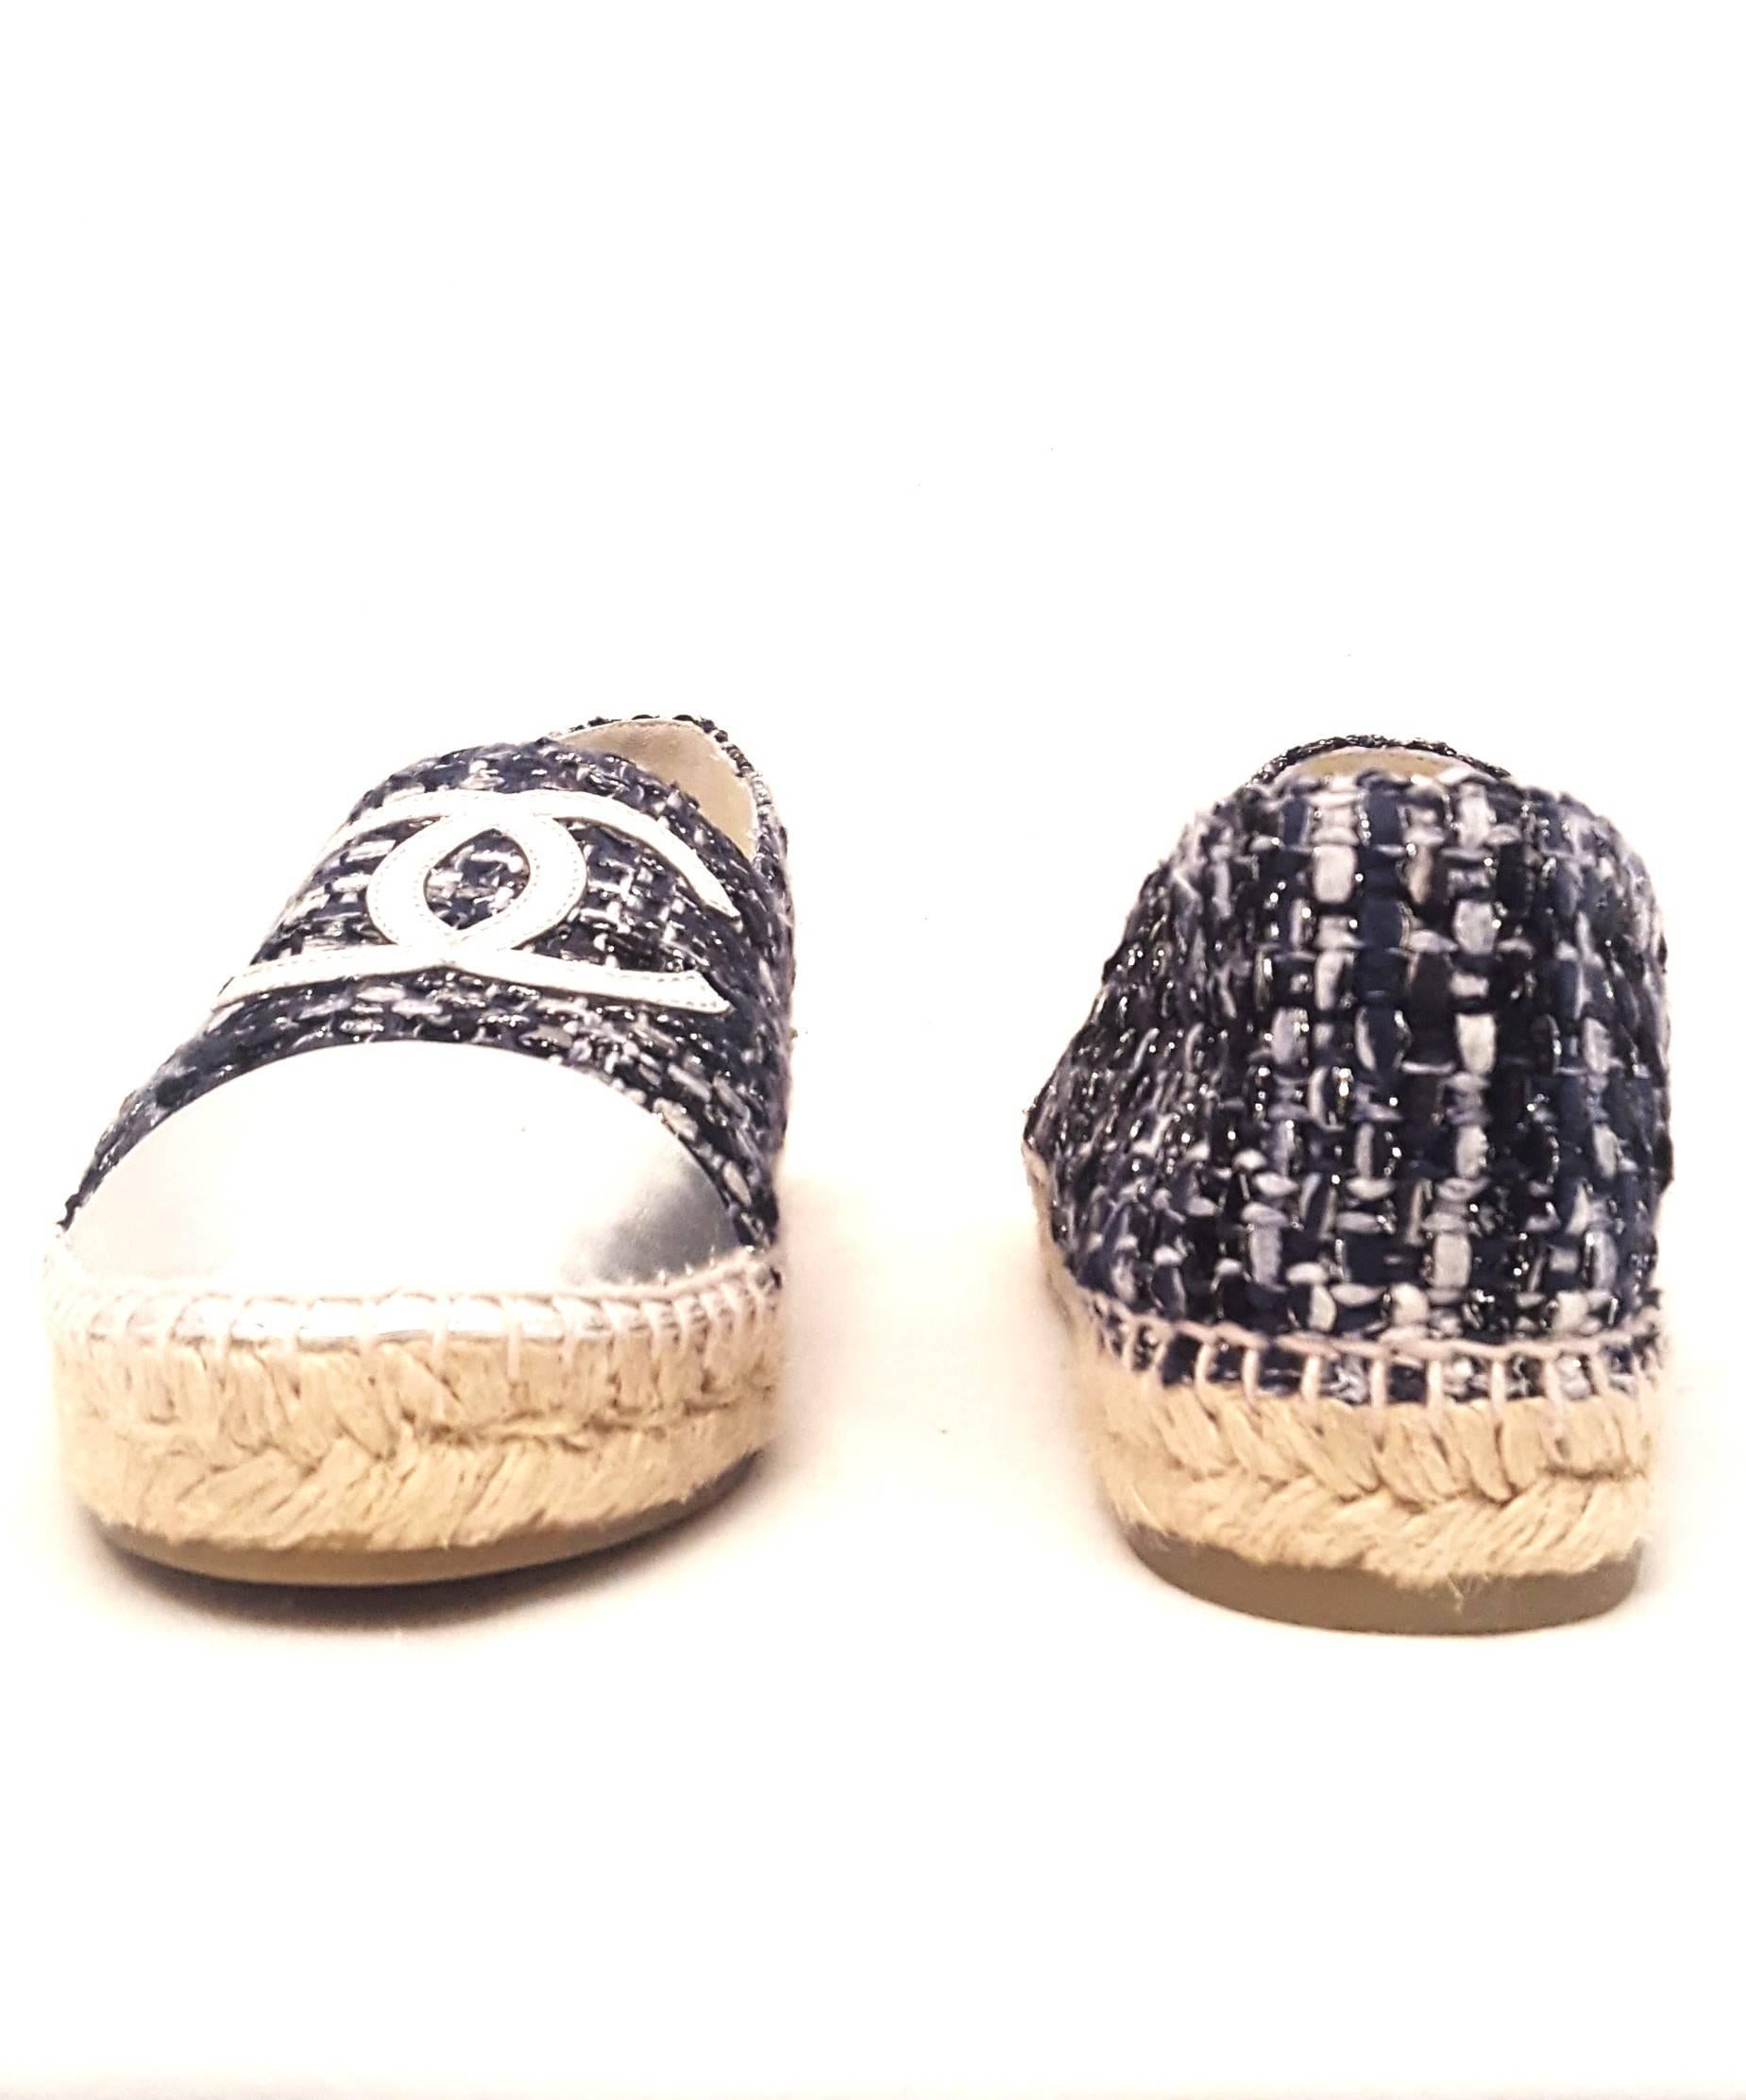 Chanel navy and grey tweed with silver metallic leather cap toe espadrilles are perfect for summer!  These espadrilles are fully lined in ivory leather including the inner soles. The iconic rope trim can be found all around the shoe.  The soles are